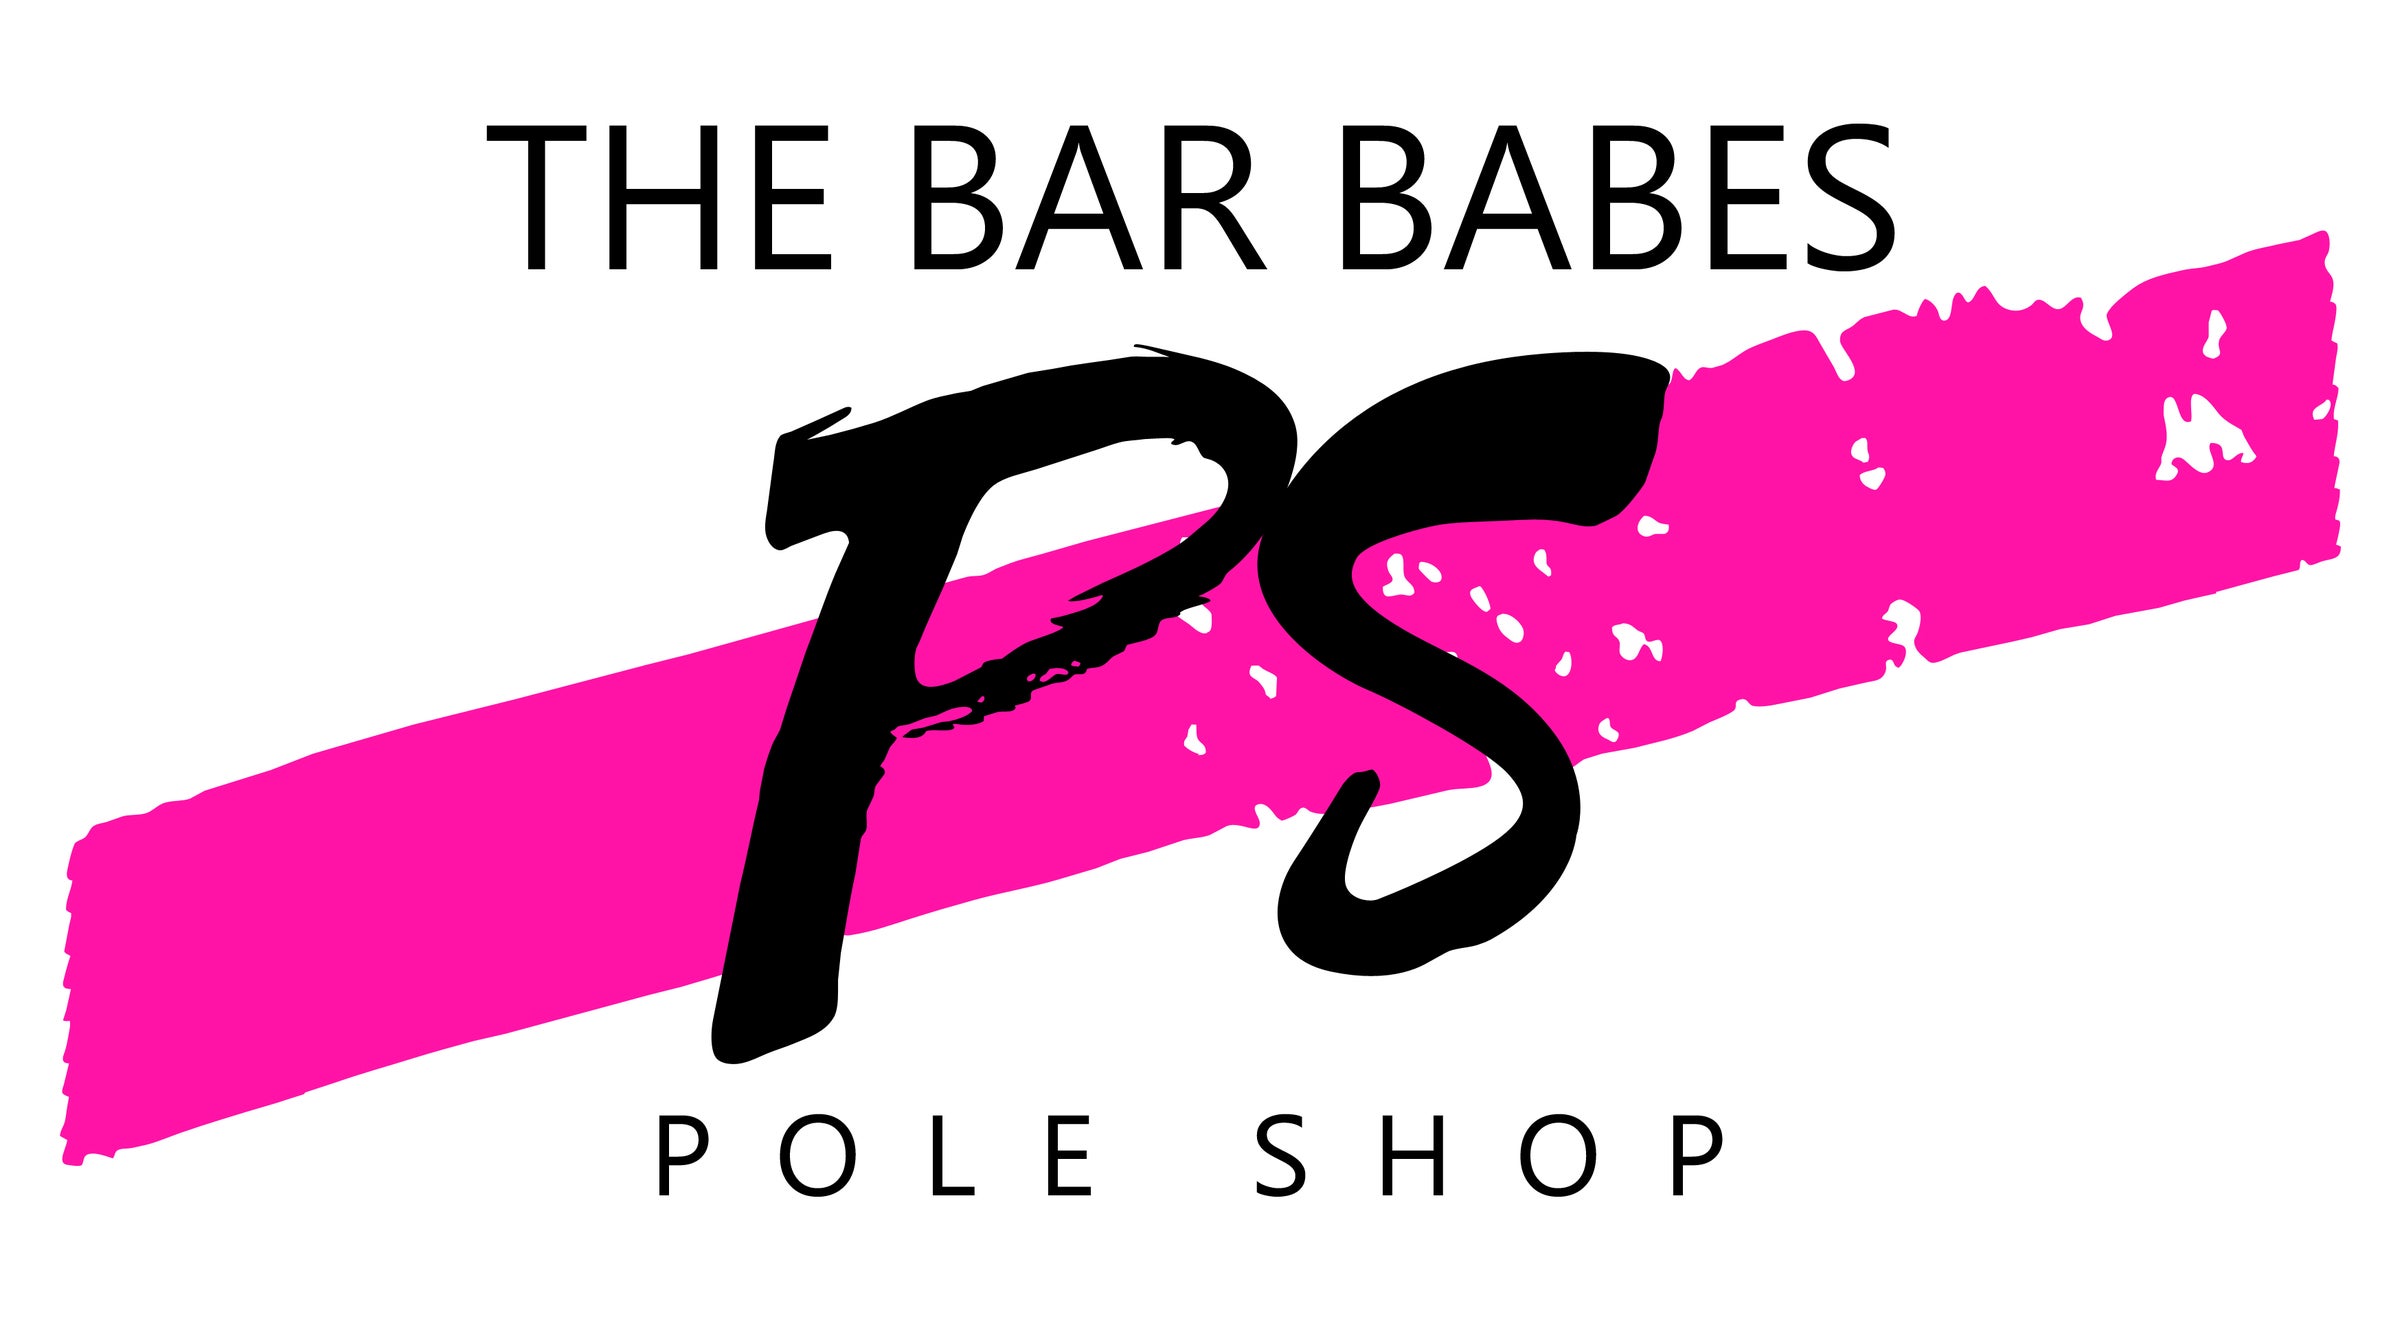 BABE Grip™: Pole Power Unleashed - Pole Dancers' Answer to Sweat-Proof Spins